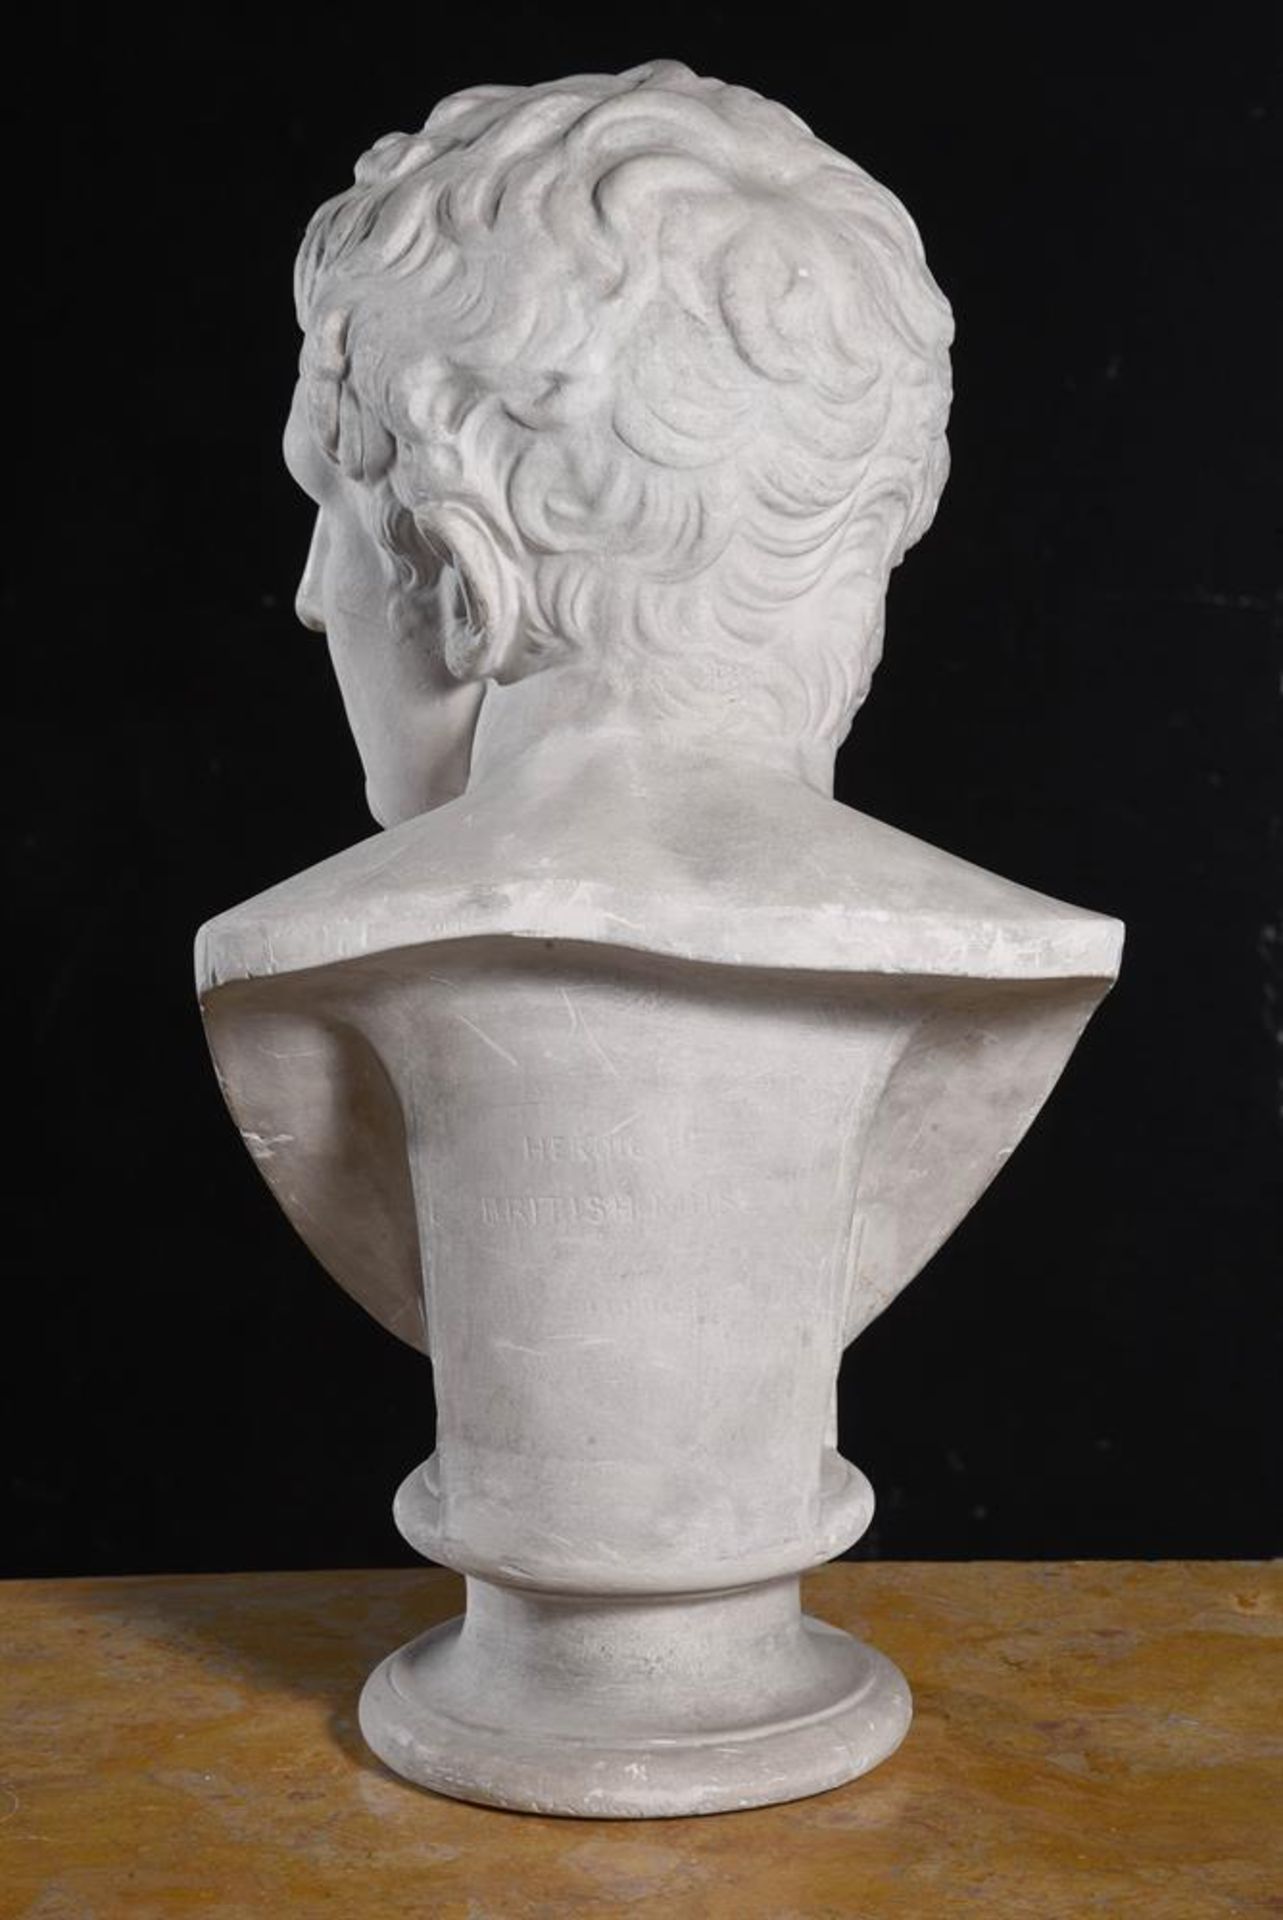 A PLASTER BUST OF A 'HEROIC HEAD', BY DOMENICO BRUCCIANI & CO, CIRCA 1900 - Image 2 of 3